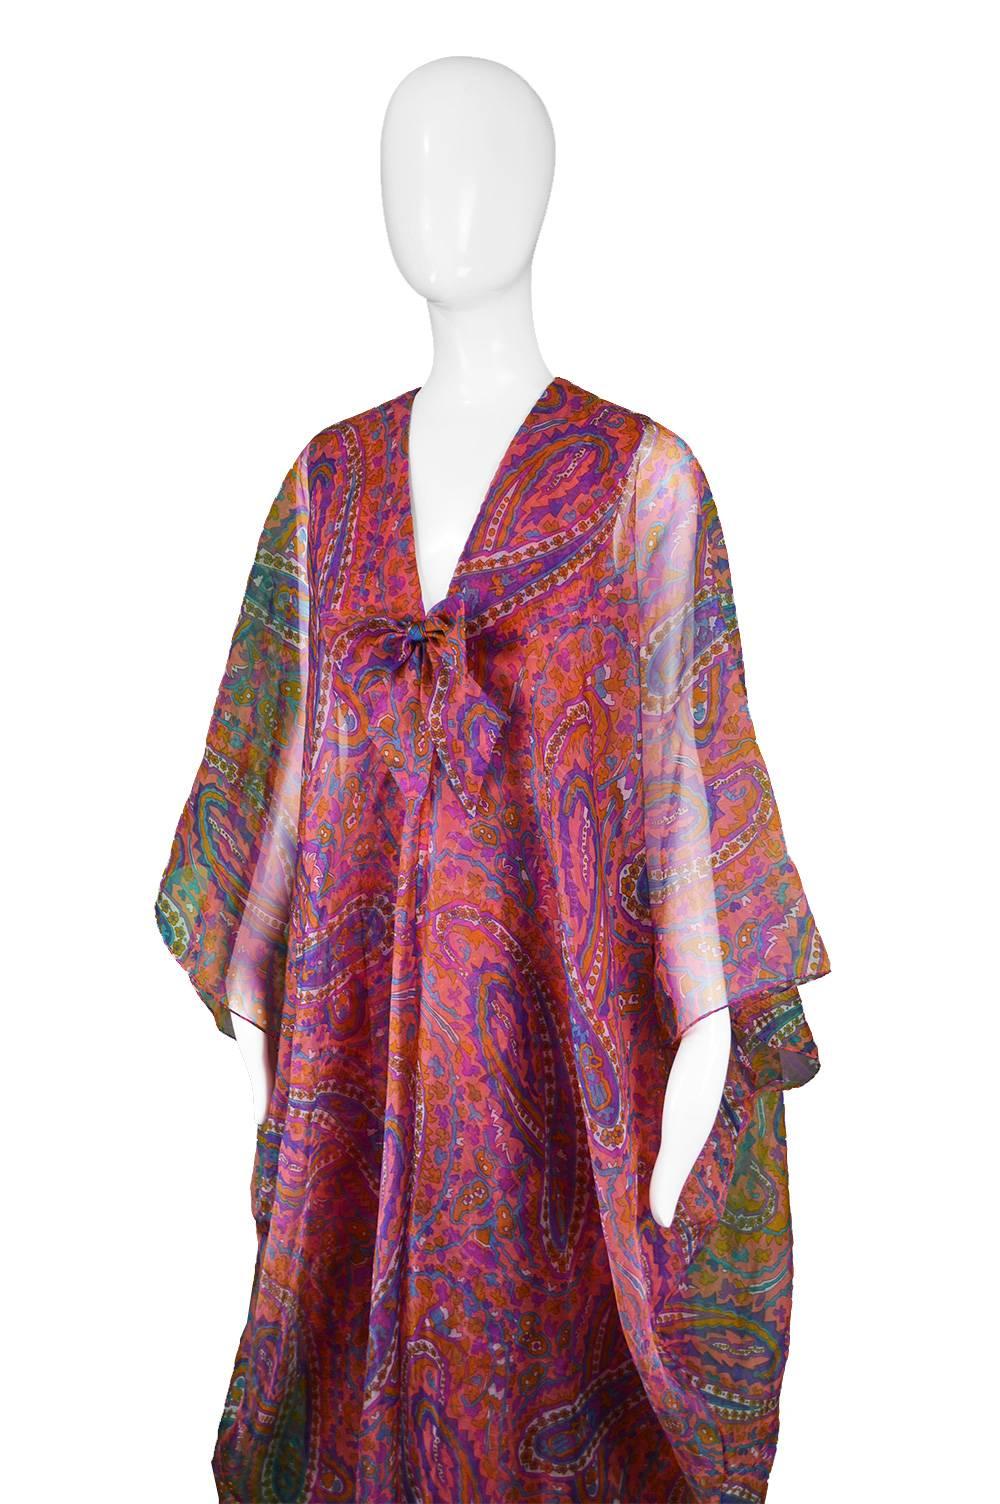 Jean Allen Vintage Pink and Orange Paisley Organza Kaftan Dress, 1970s In Excellent Condition For Sale In Doncaster, South Yorkshire